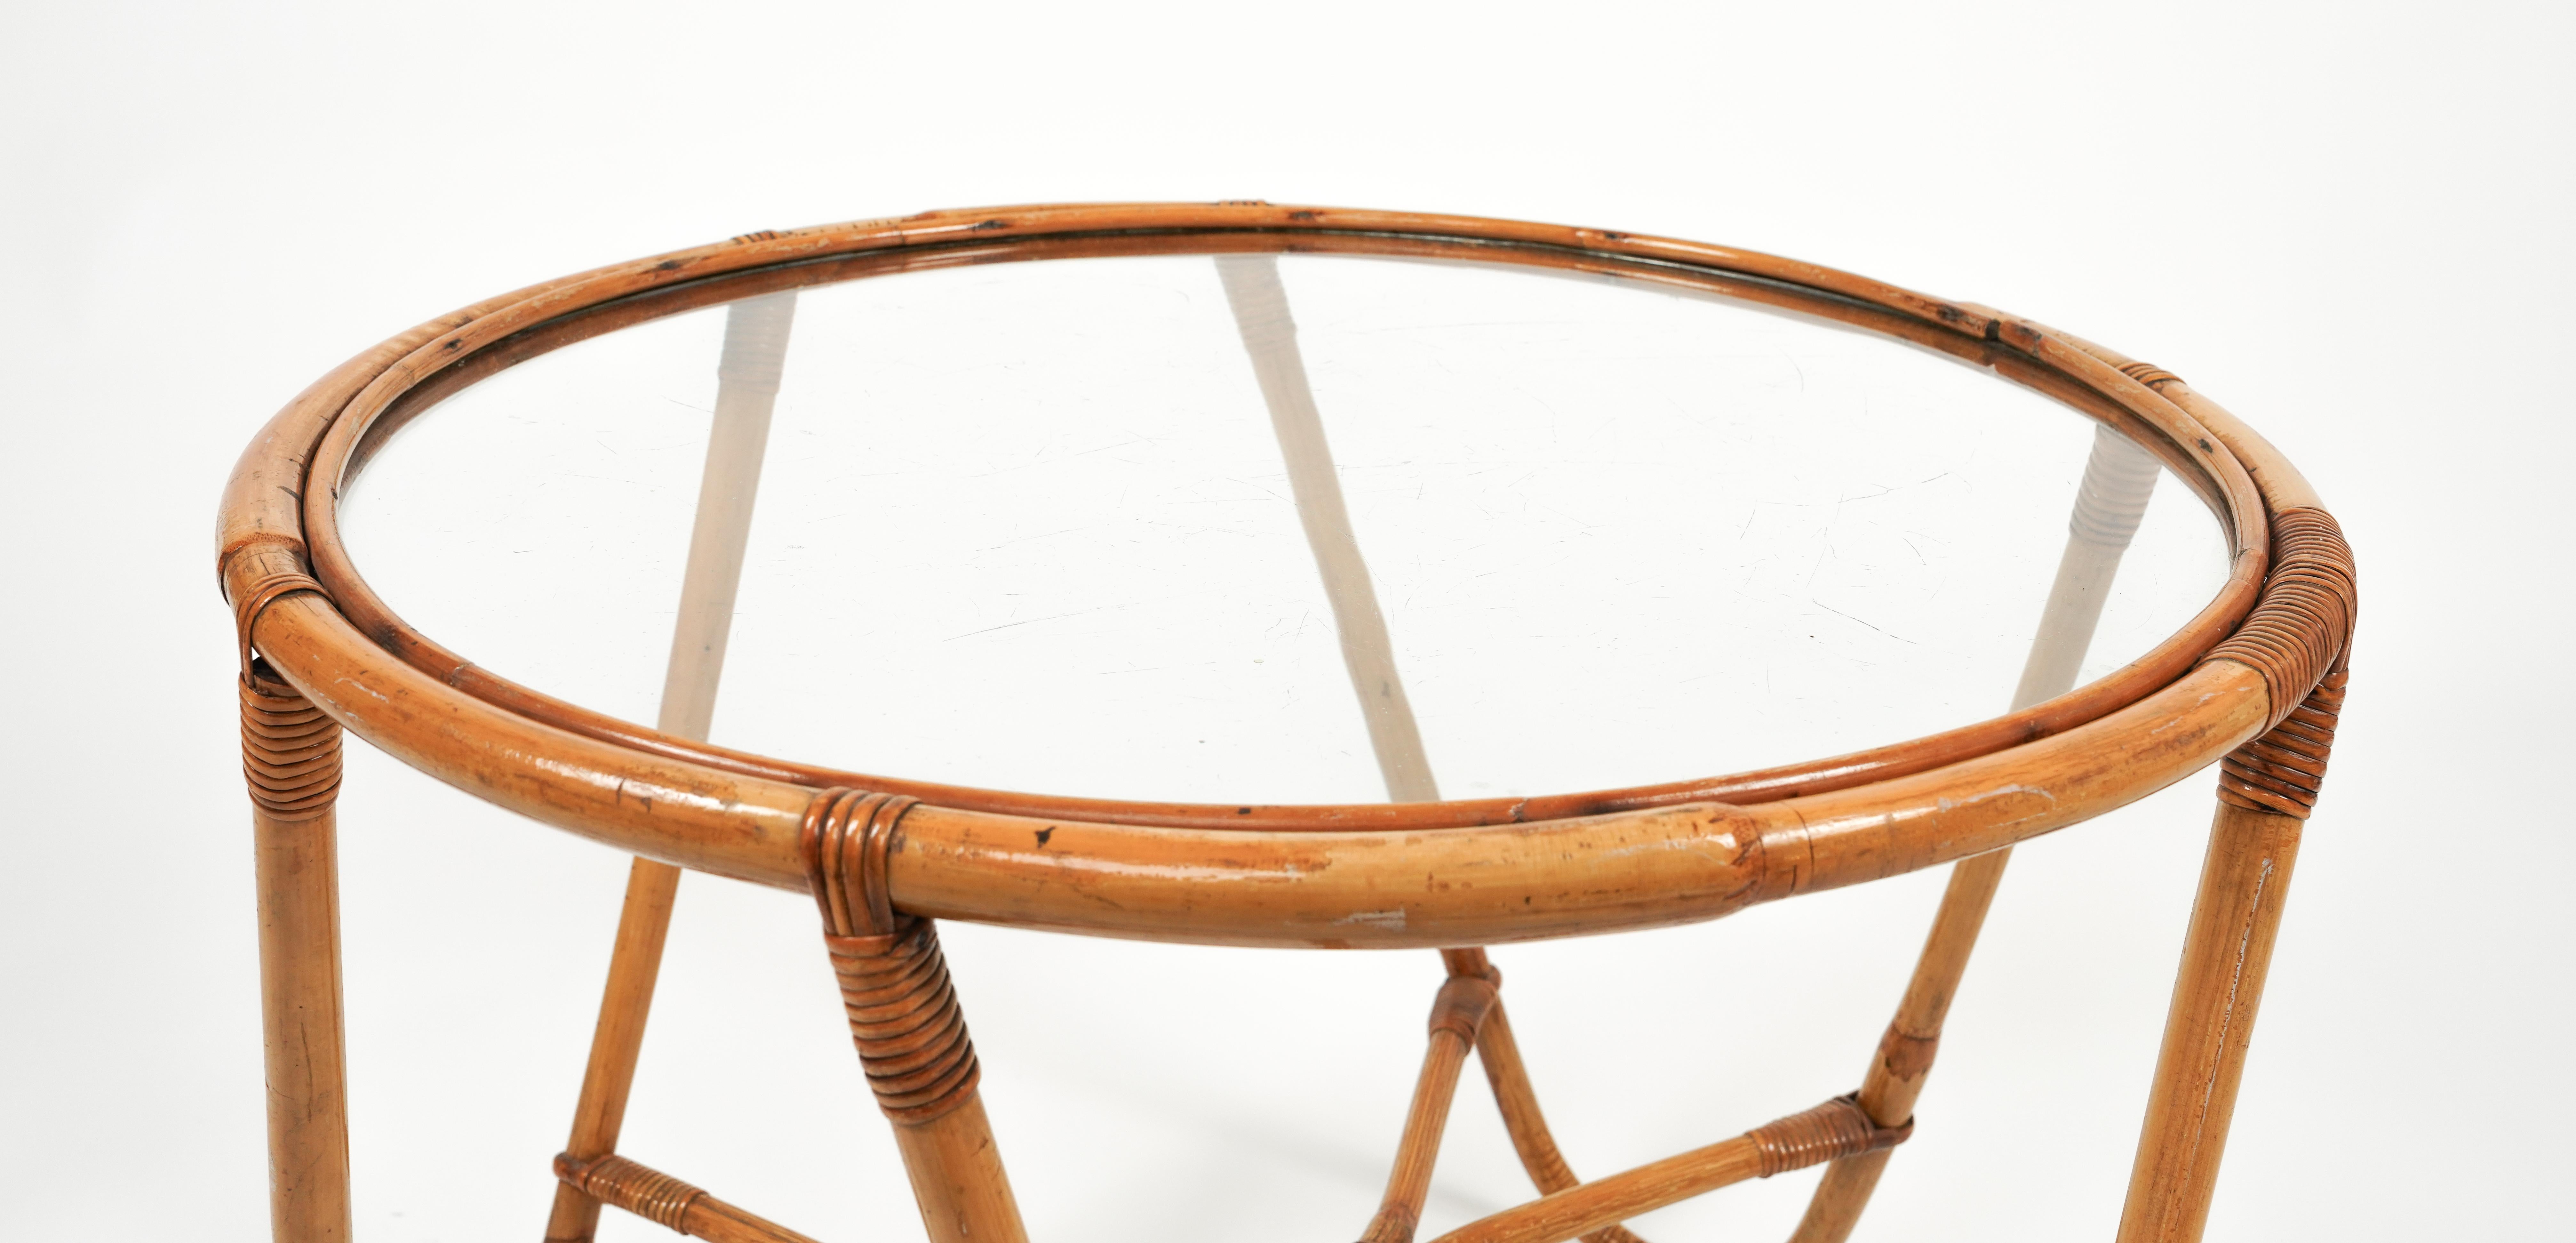 Midcentury Round Coffee Table in Bamboo, Rattan and Glass, Italy 1960s For Sale 7